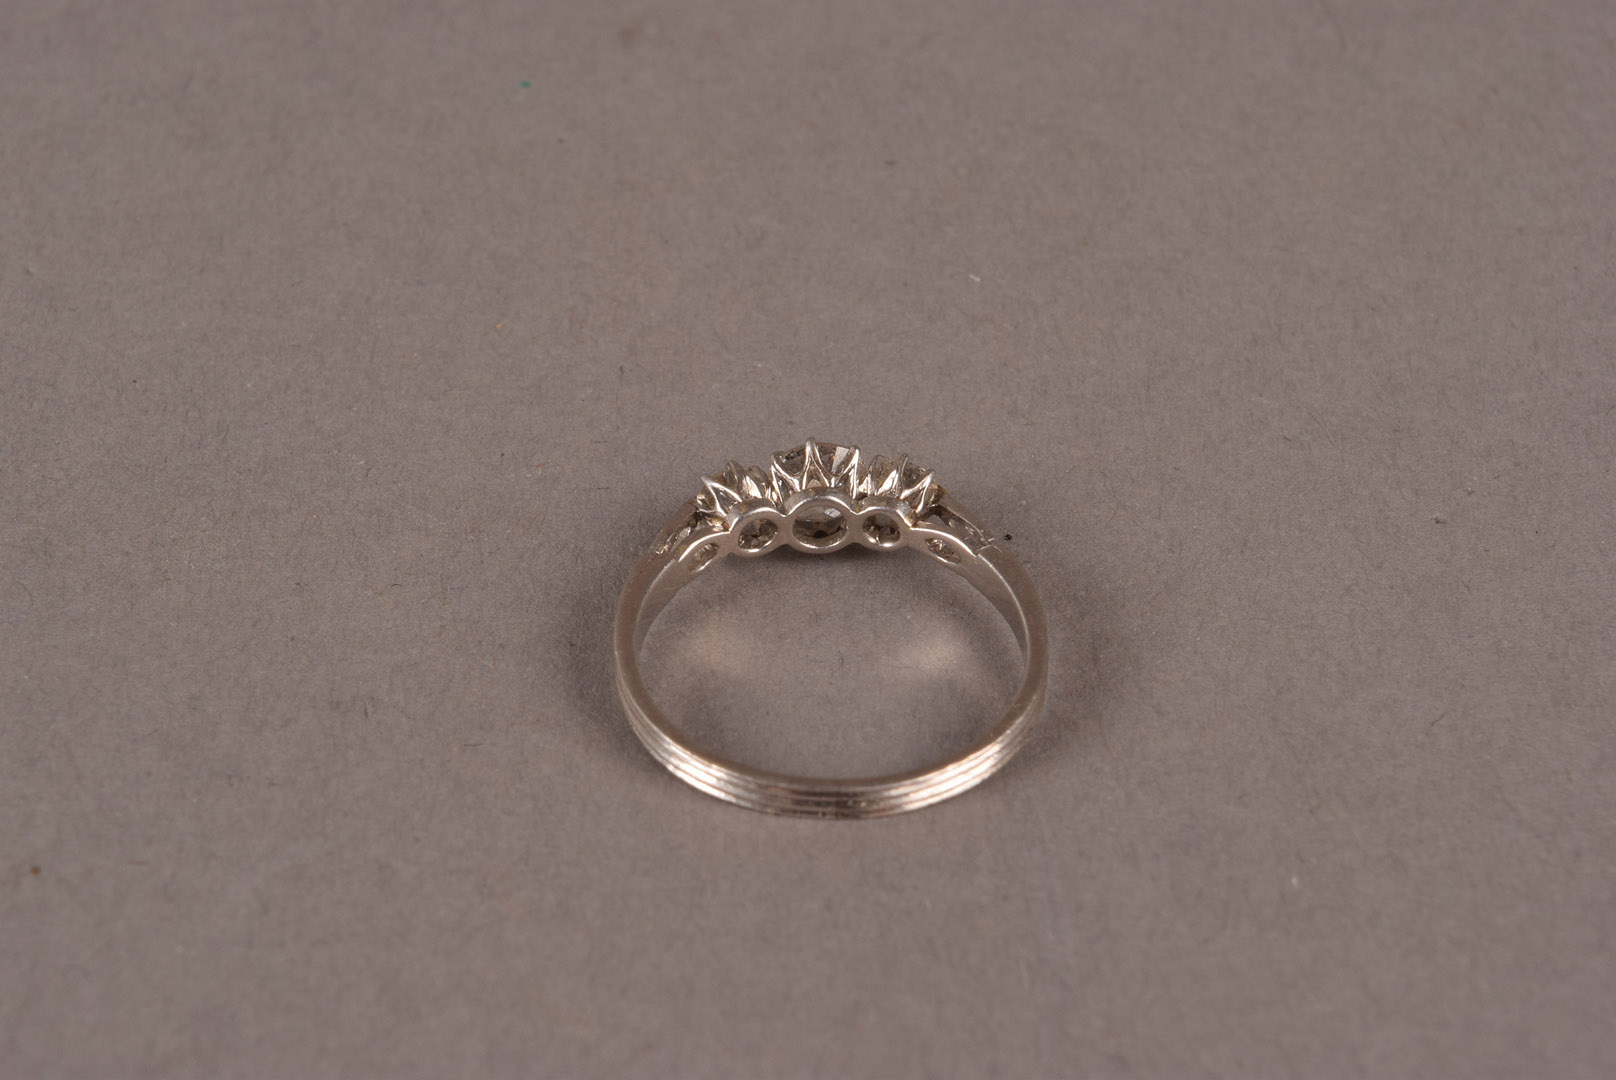 An Art Deco period three stone diamond engagement ring, set with three old cuts on mount with - Image 3 of 4